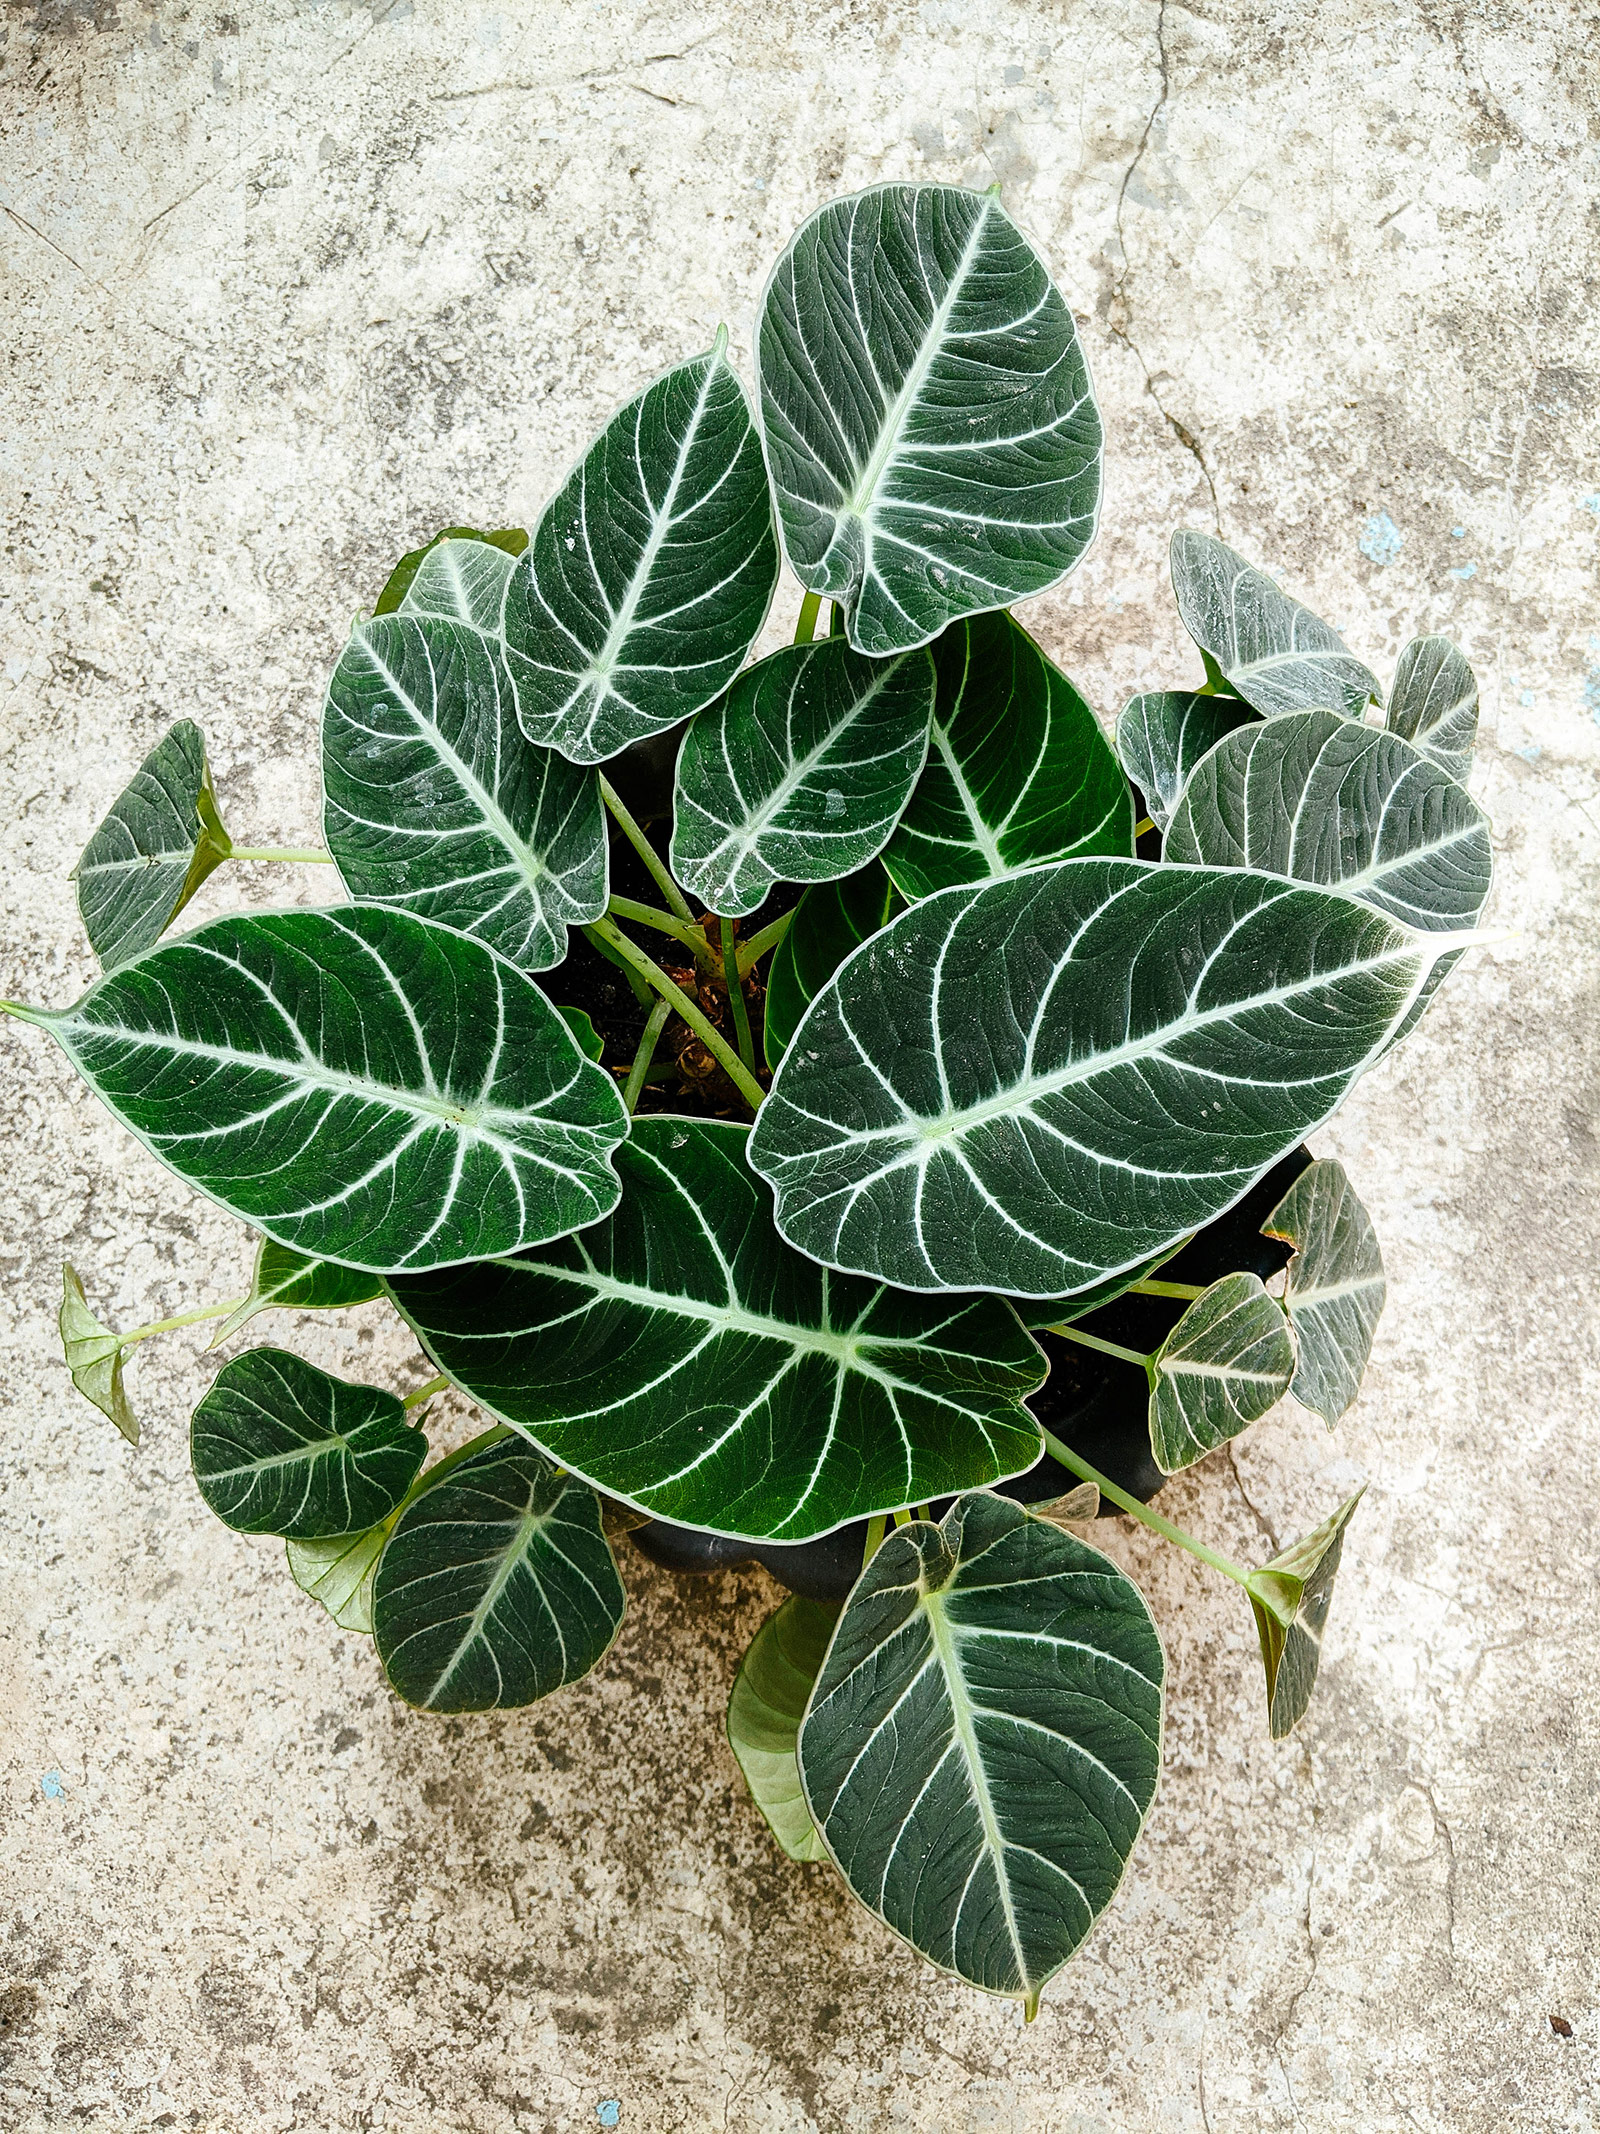 Overhead view of Alocasia Black Velvet plant on a distressed concrete surface